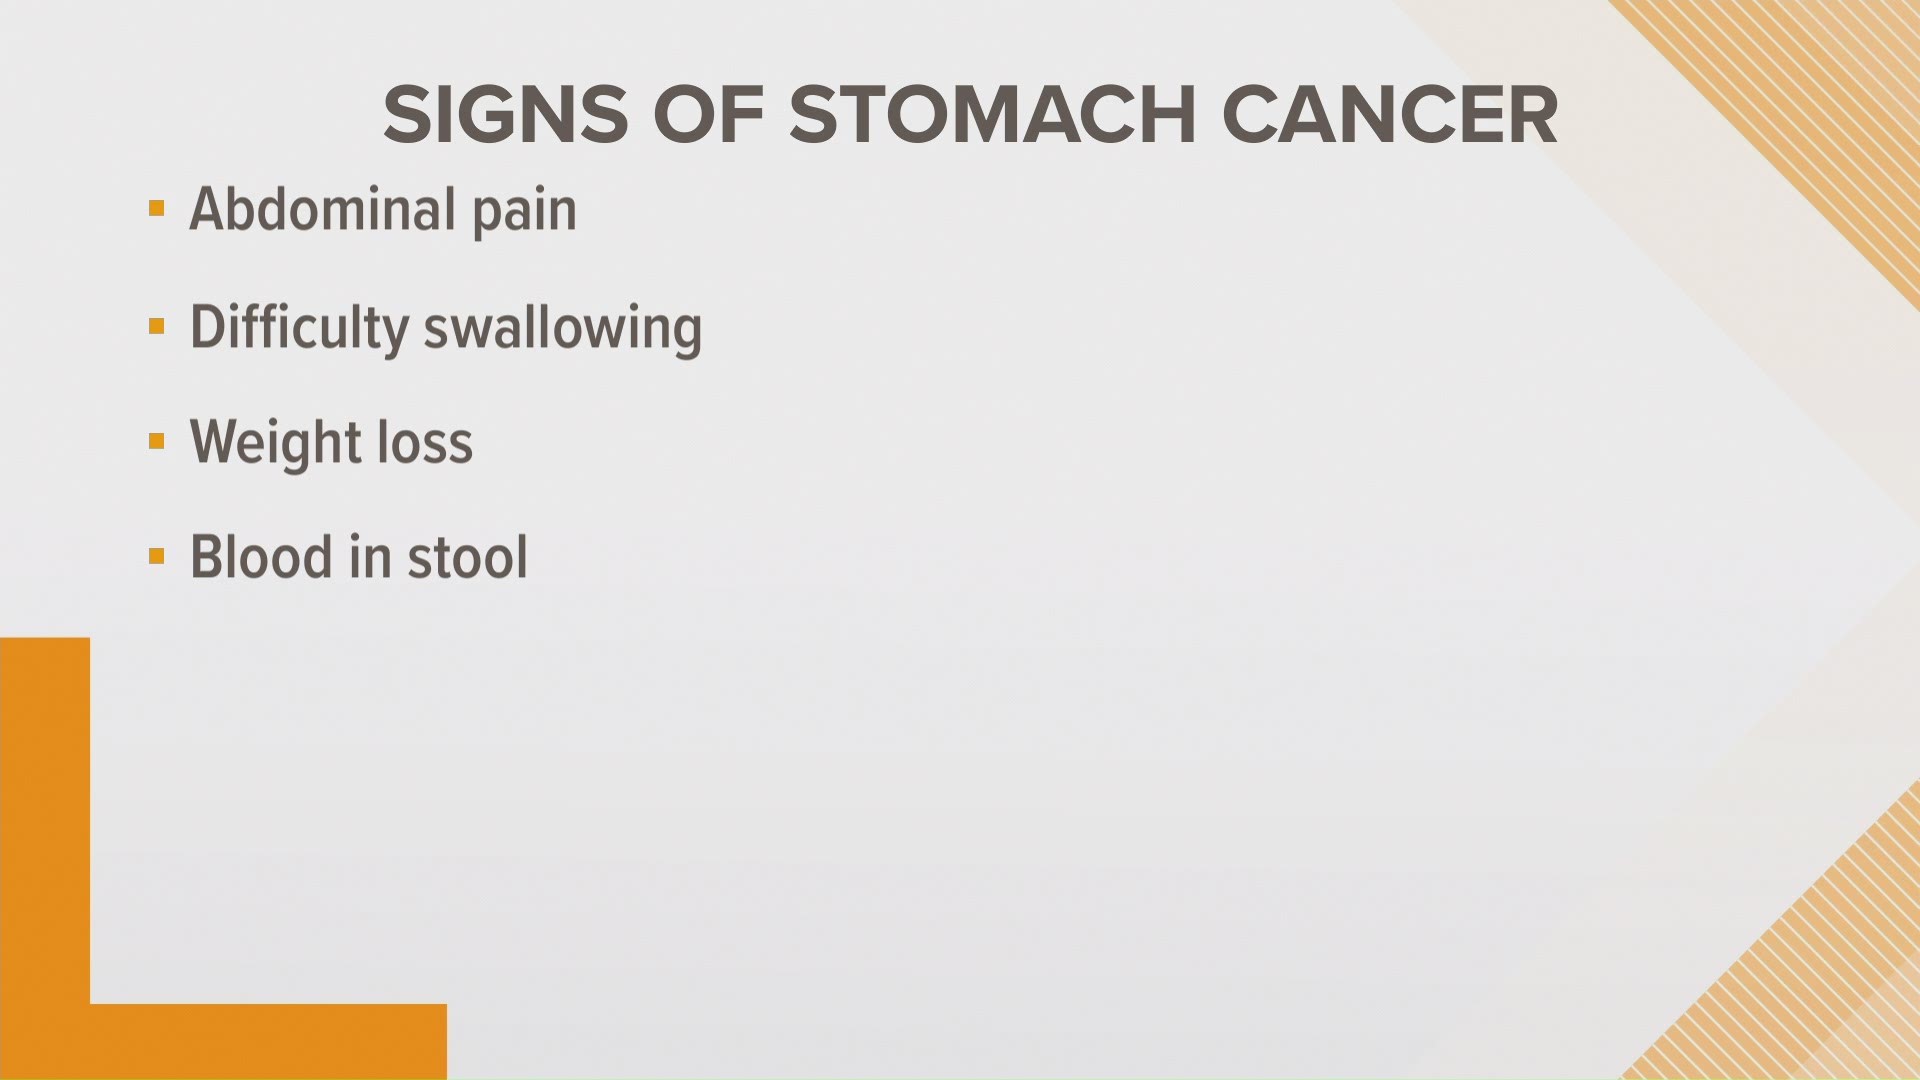 Signs of stomach cancer can include weight loss, blood in the stool, abdominal pain and difficulty swallowing. Consult with your doctor about symptoms.